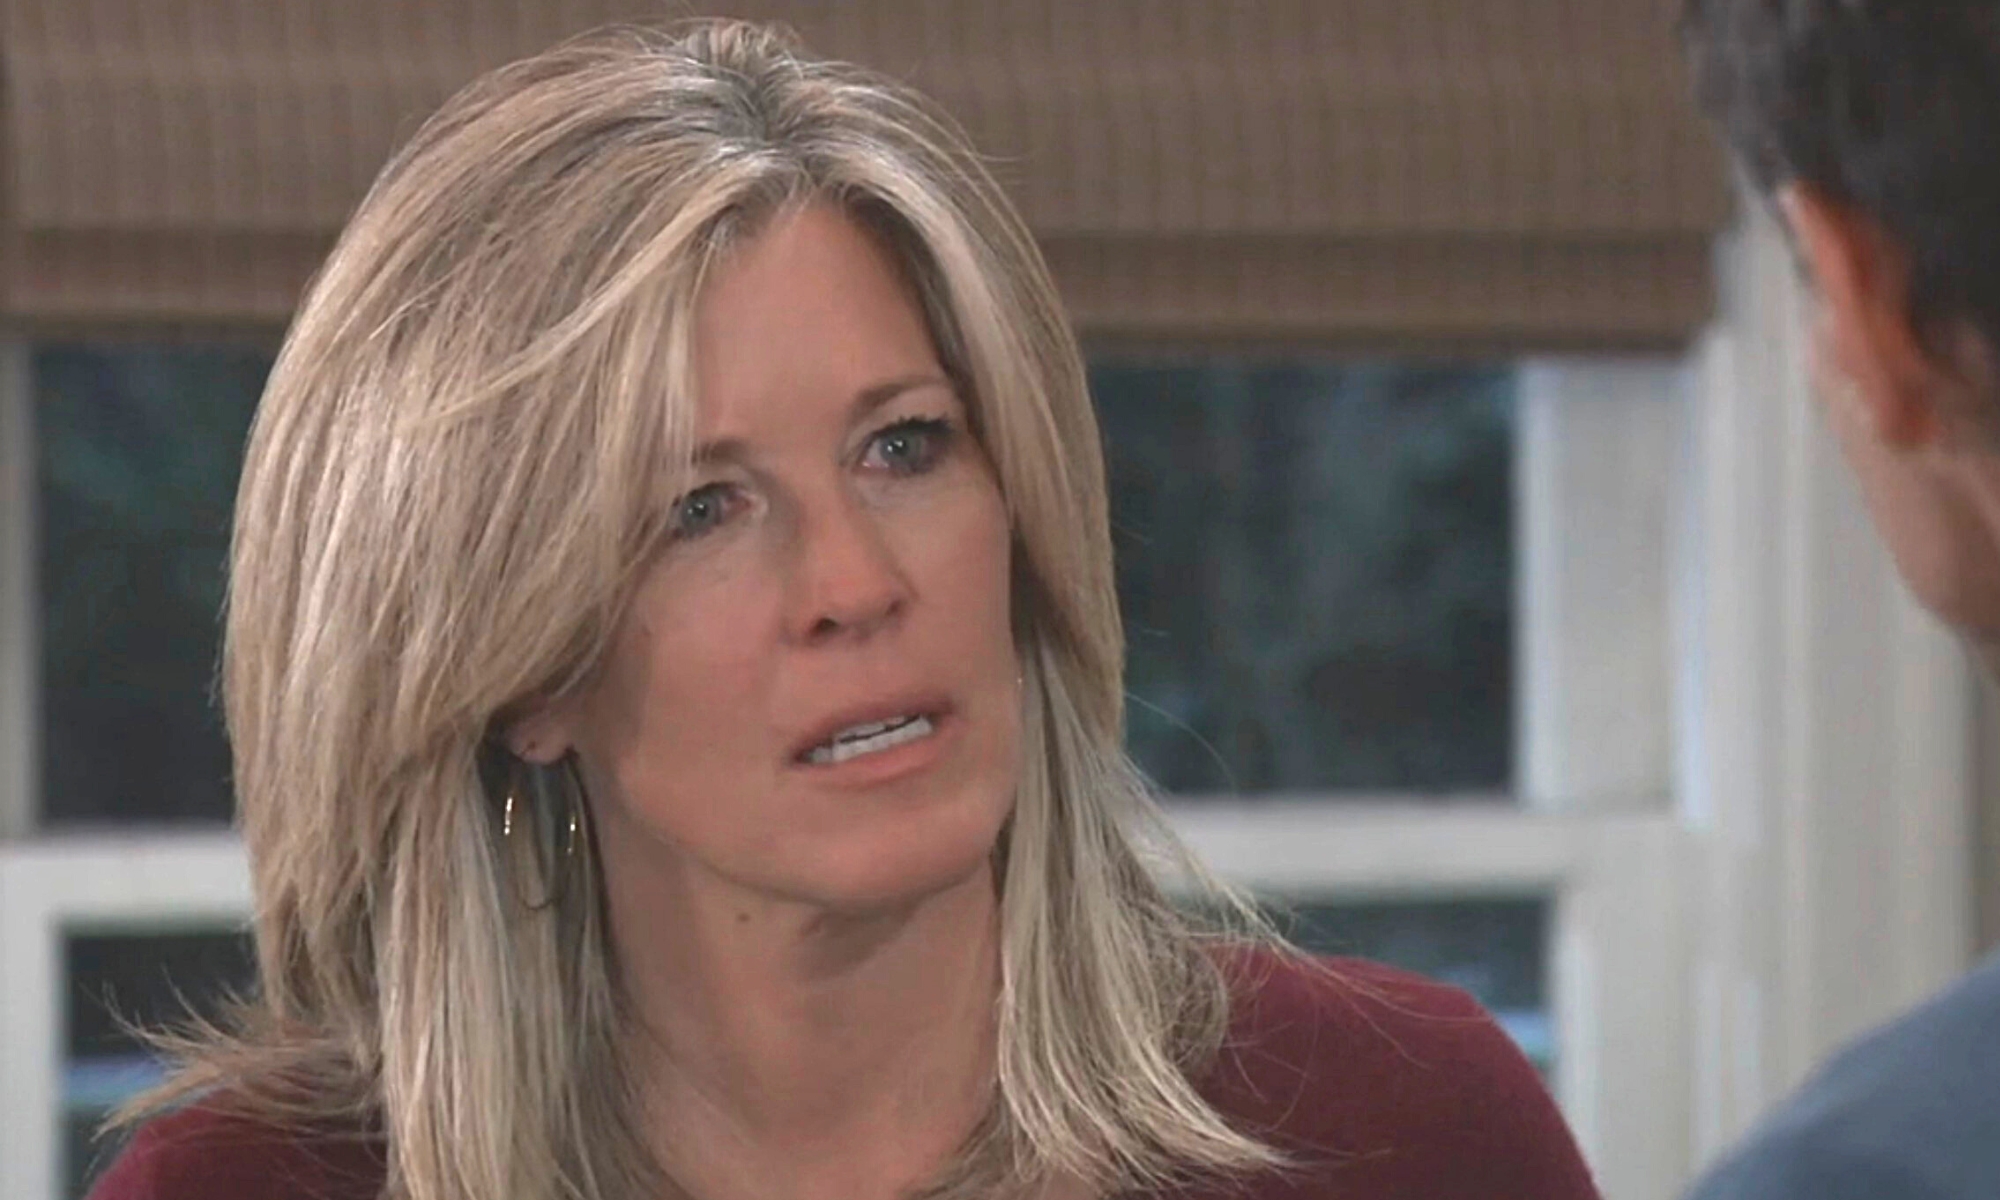 General Hospital Spoilers: Will Carly Come Clean To Save Willow?